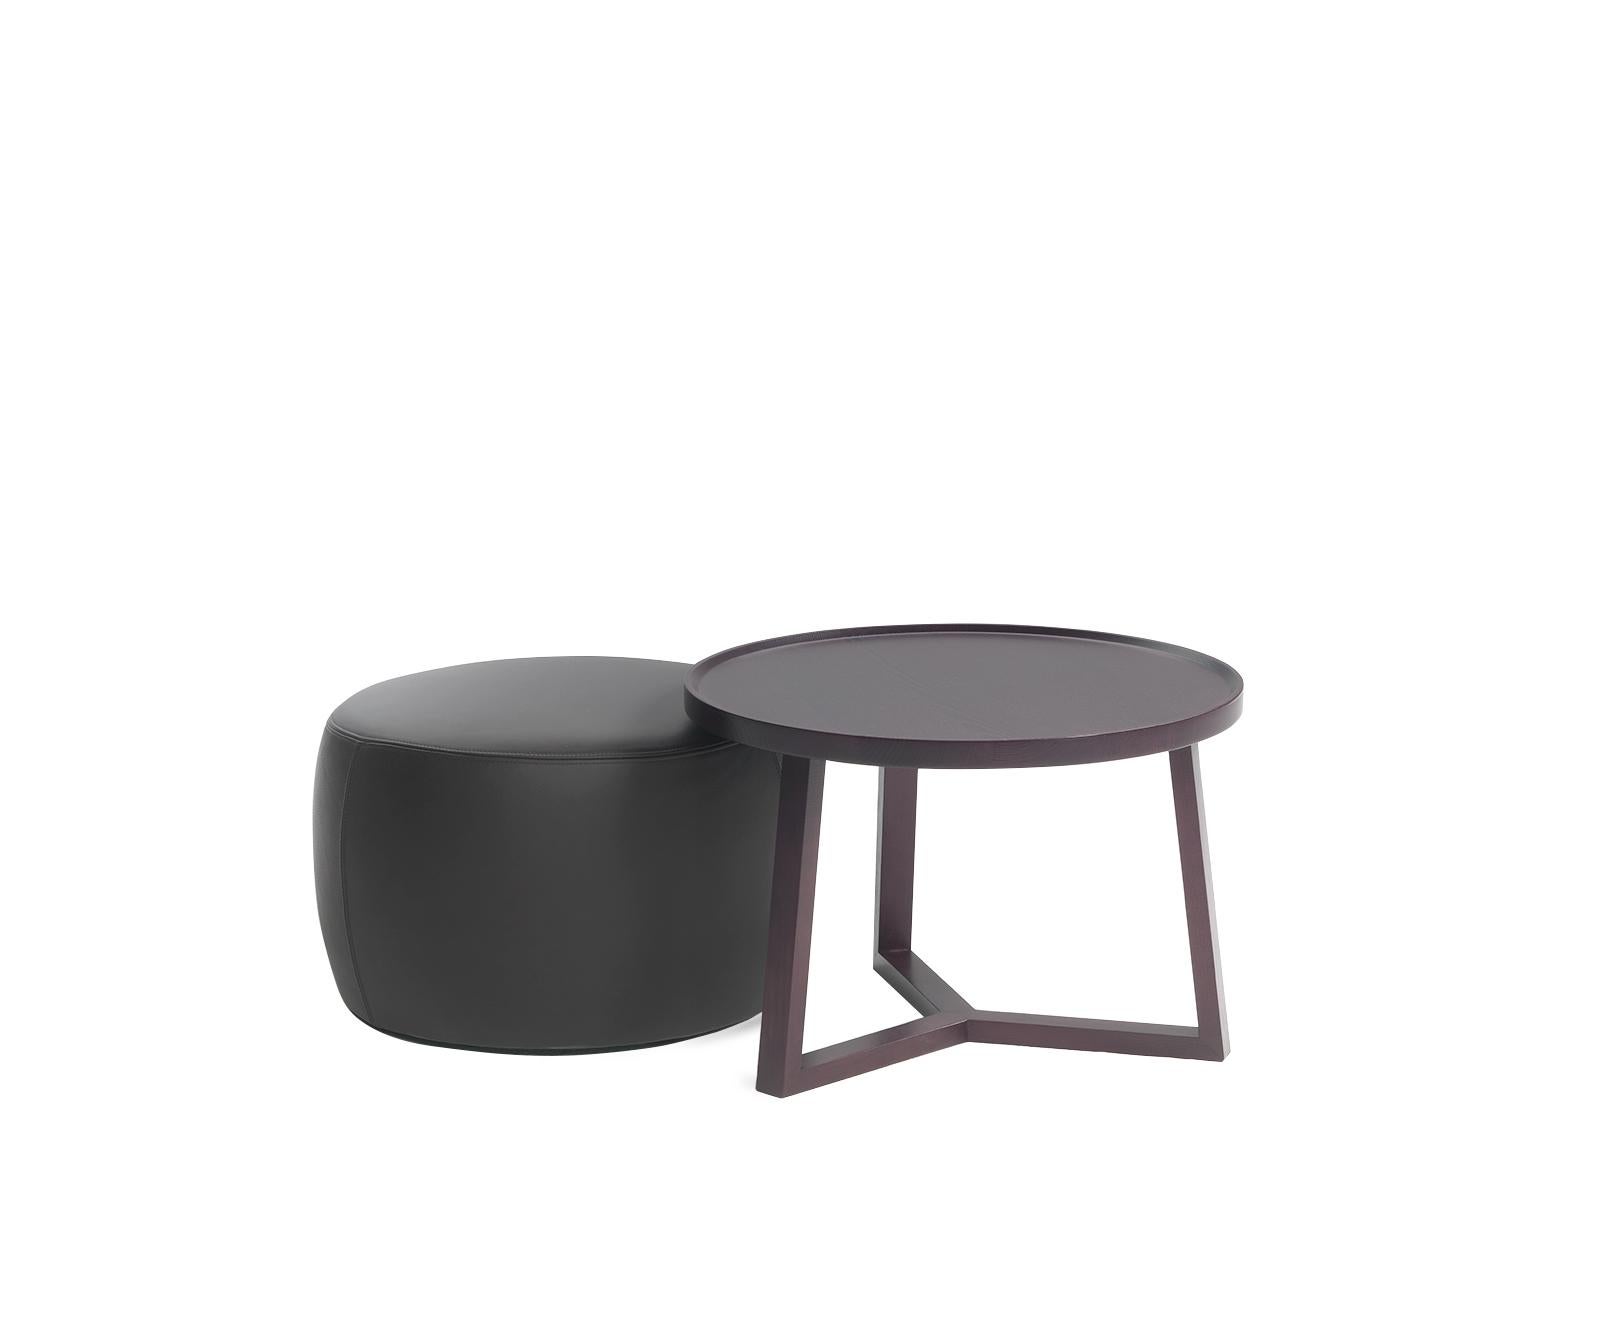 Side table in solid wood available in wenge or Canaletto walnut. Two different heights are available.